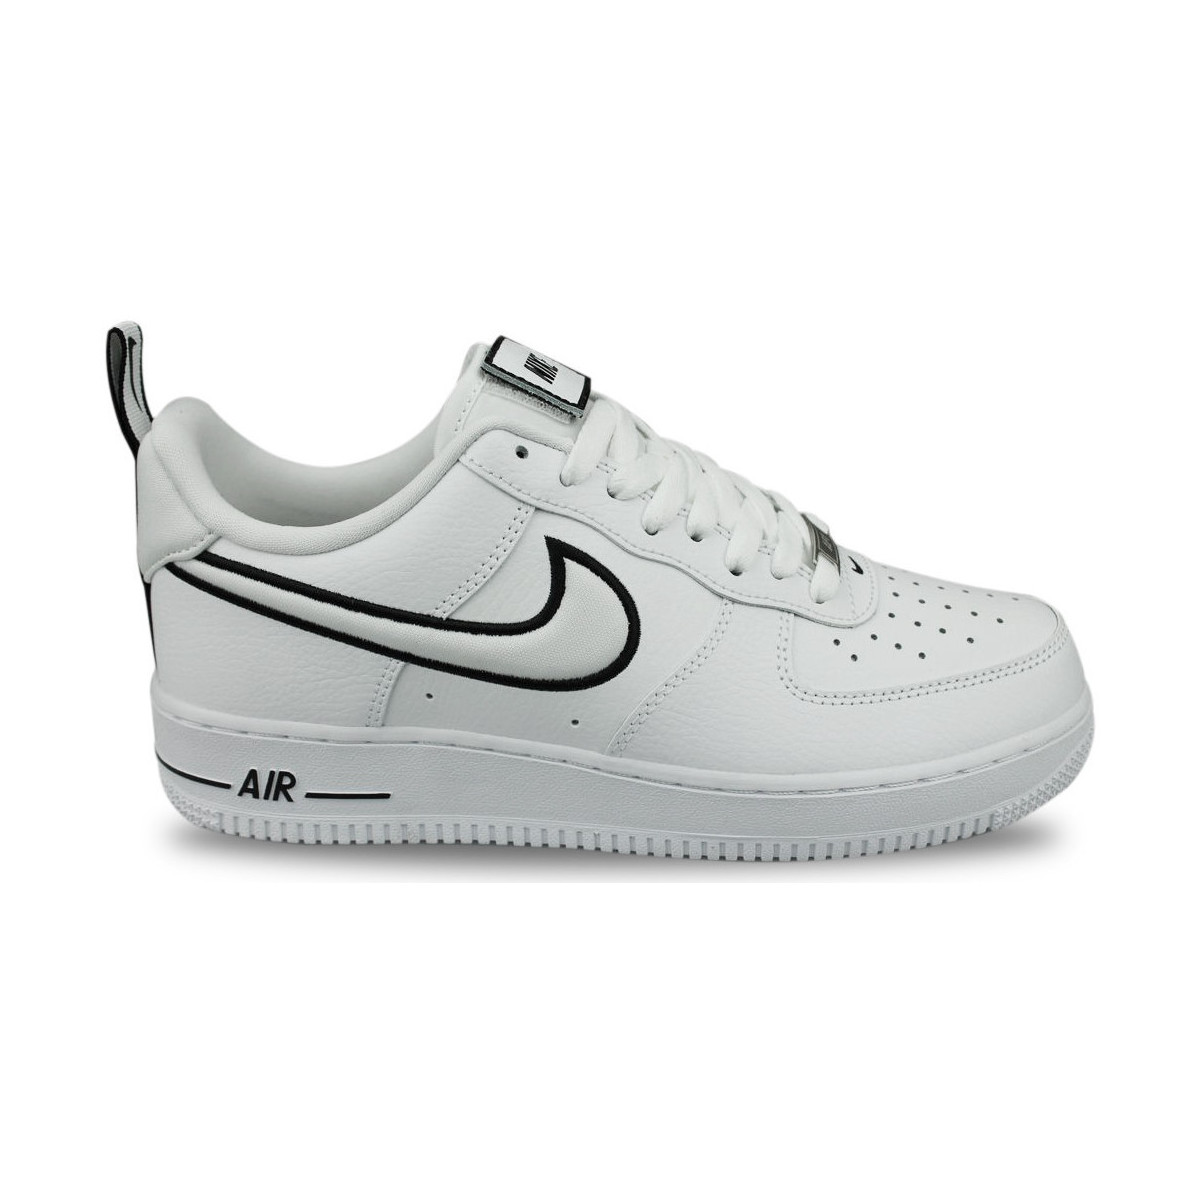 Nike Blanc Air Force 1 Low Outline Swoosh White yYVhln54